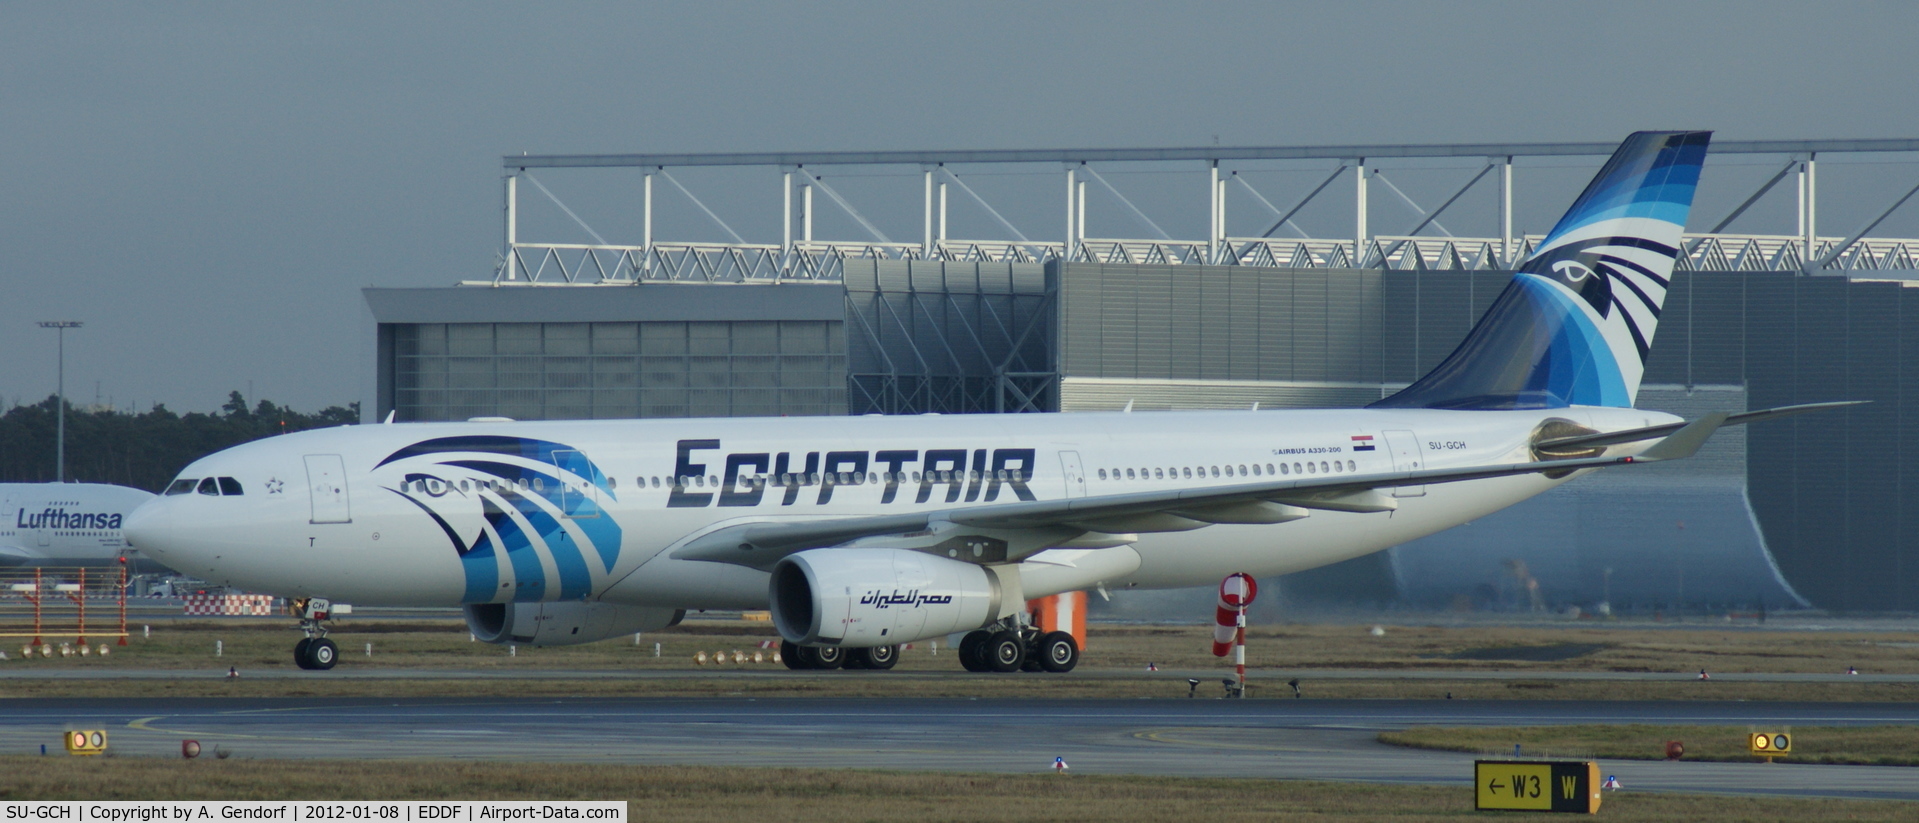 SU-GCH, 2005 Airbus A330-243 C/N 683, Egypt Air, is seen here taxiing to parking position after landing at Frankfurt Int´l (EDDF)